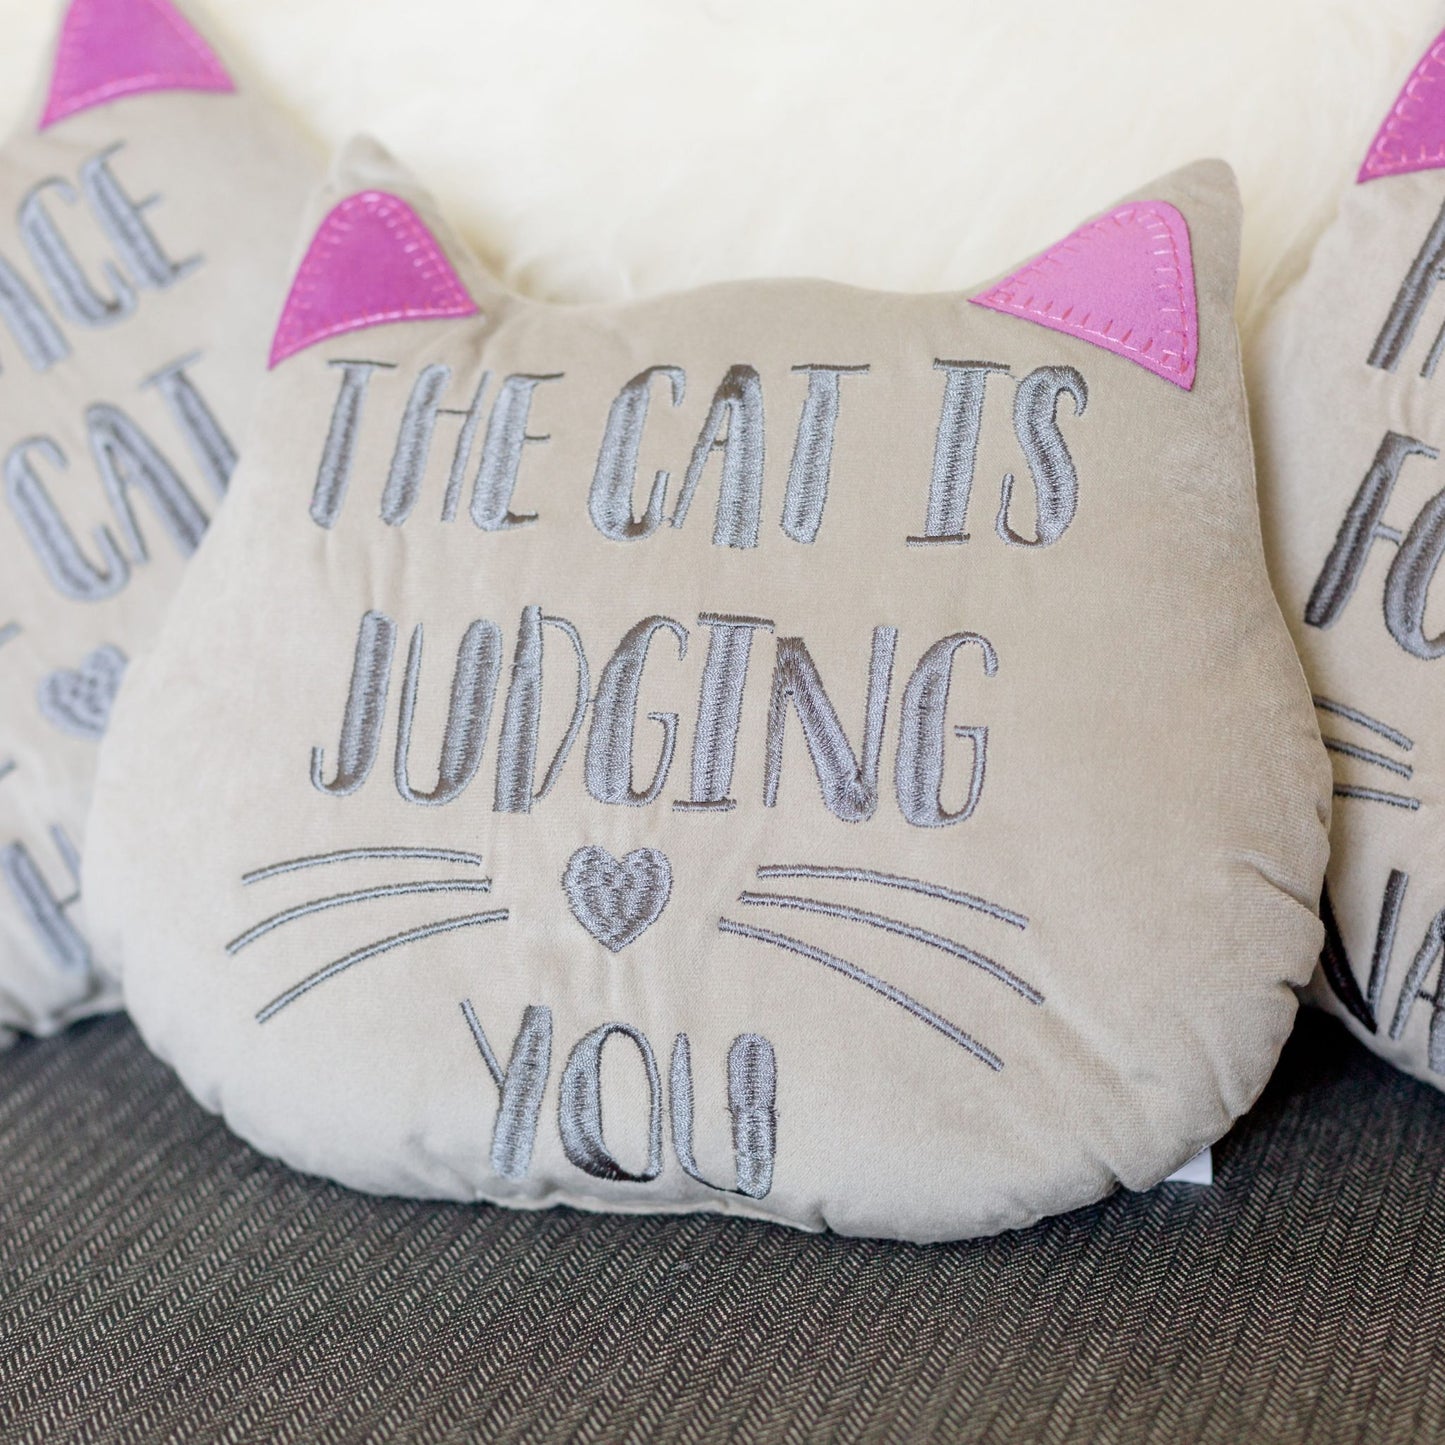 cat head cushion - 3 designs available the cat is judging you